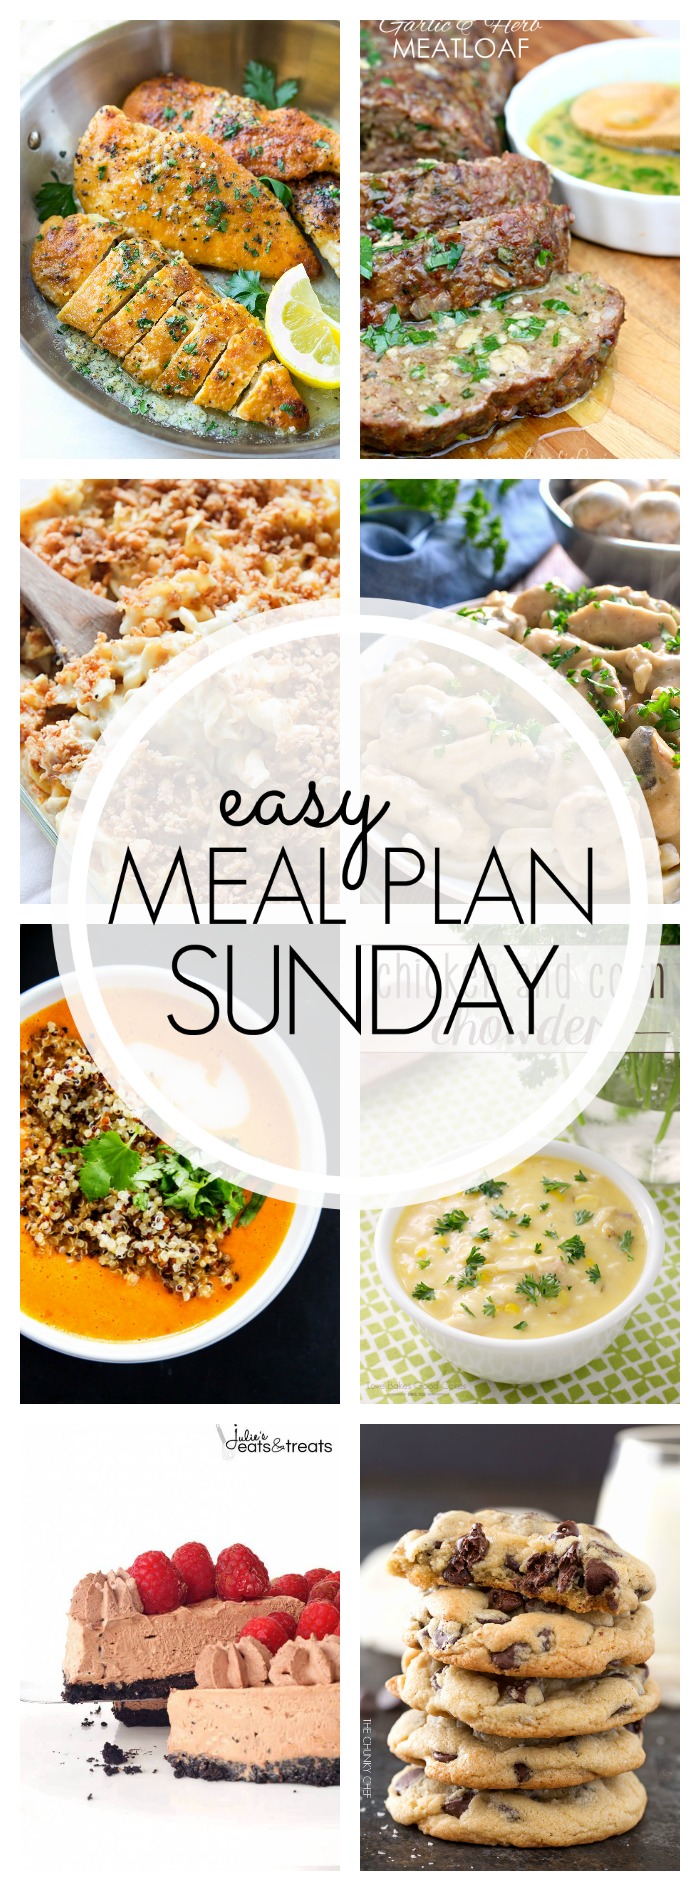 Easy Meal Plan Sunday #83